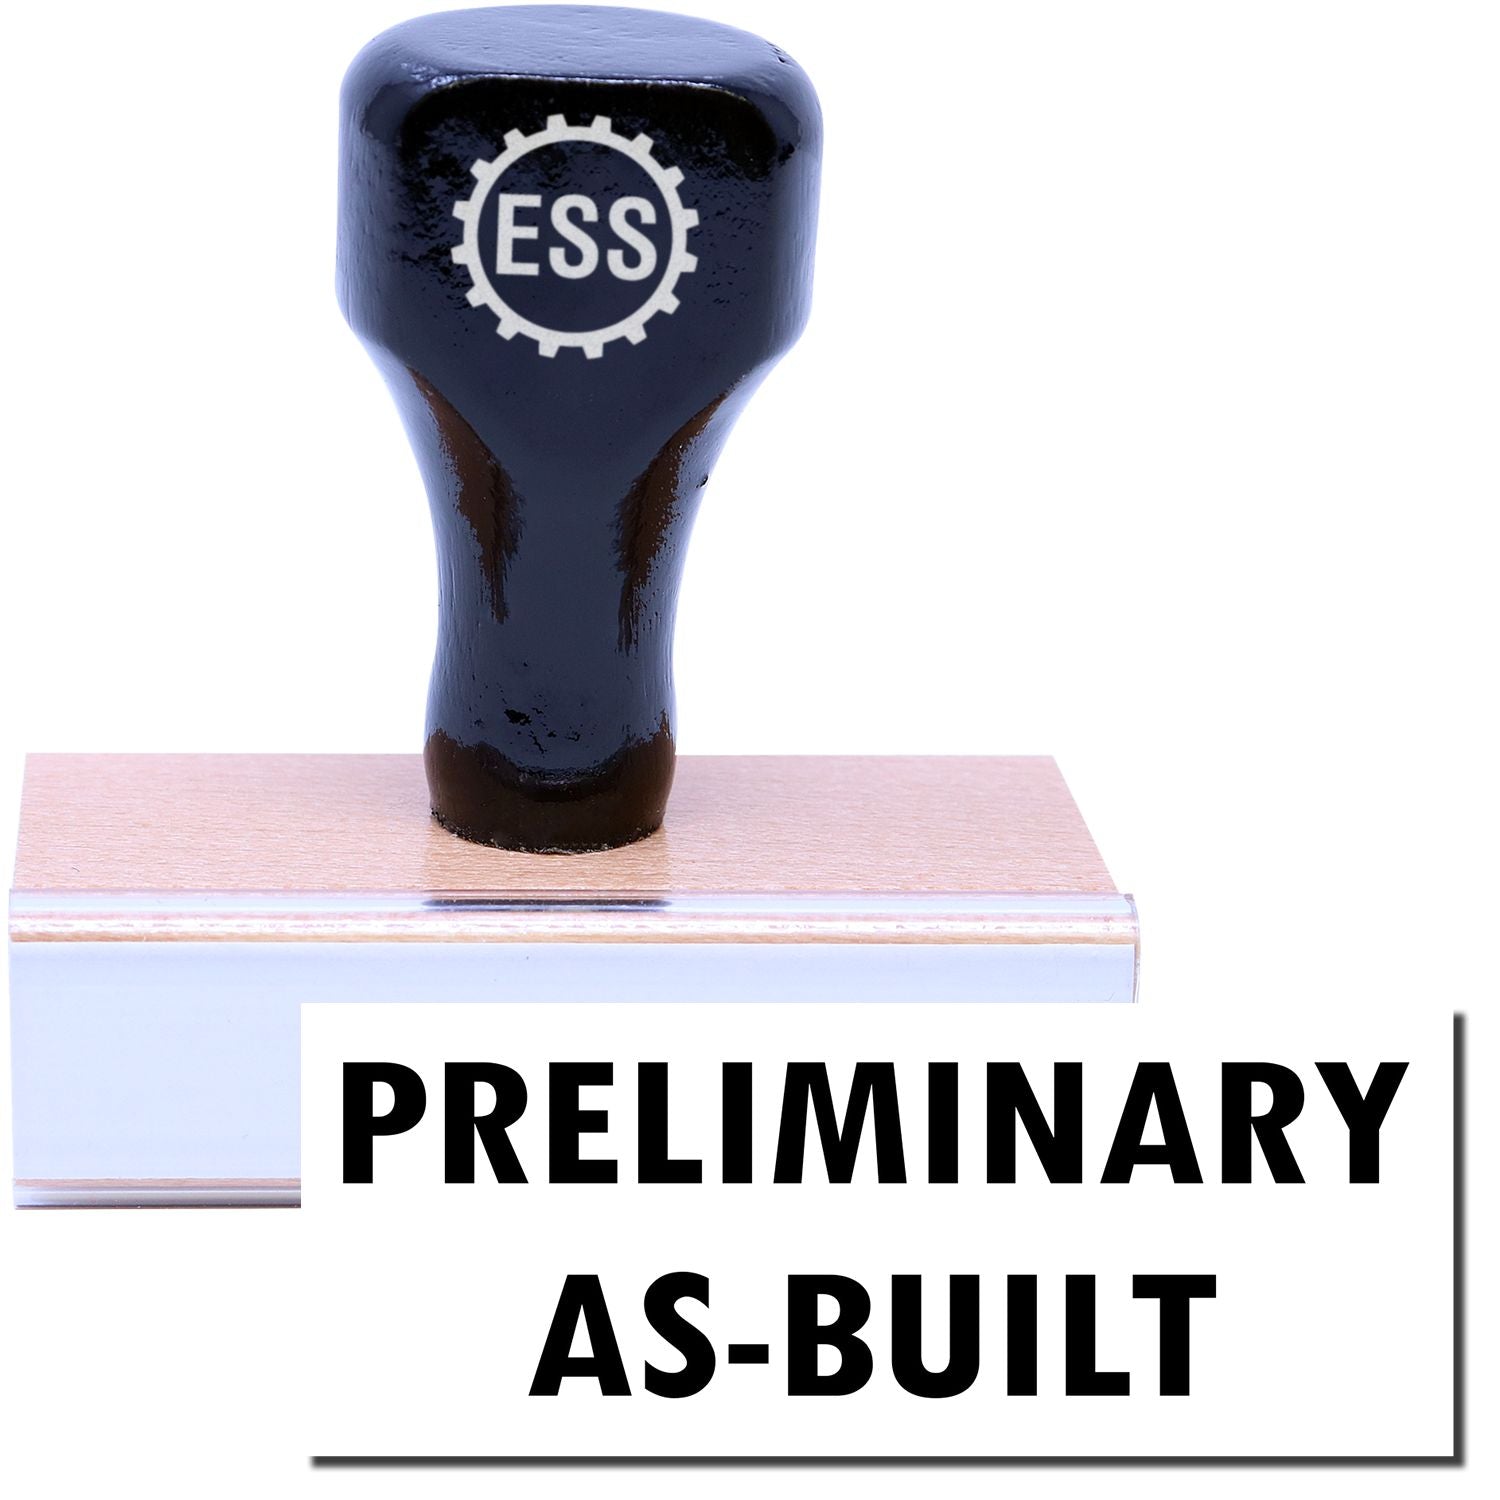 A stock office rubber stamp with a stamped image showing how the text "PRELIMINARY AS-BUILT" in a large font is displayed after stamping.